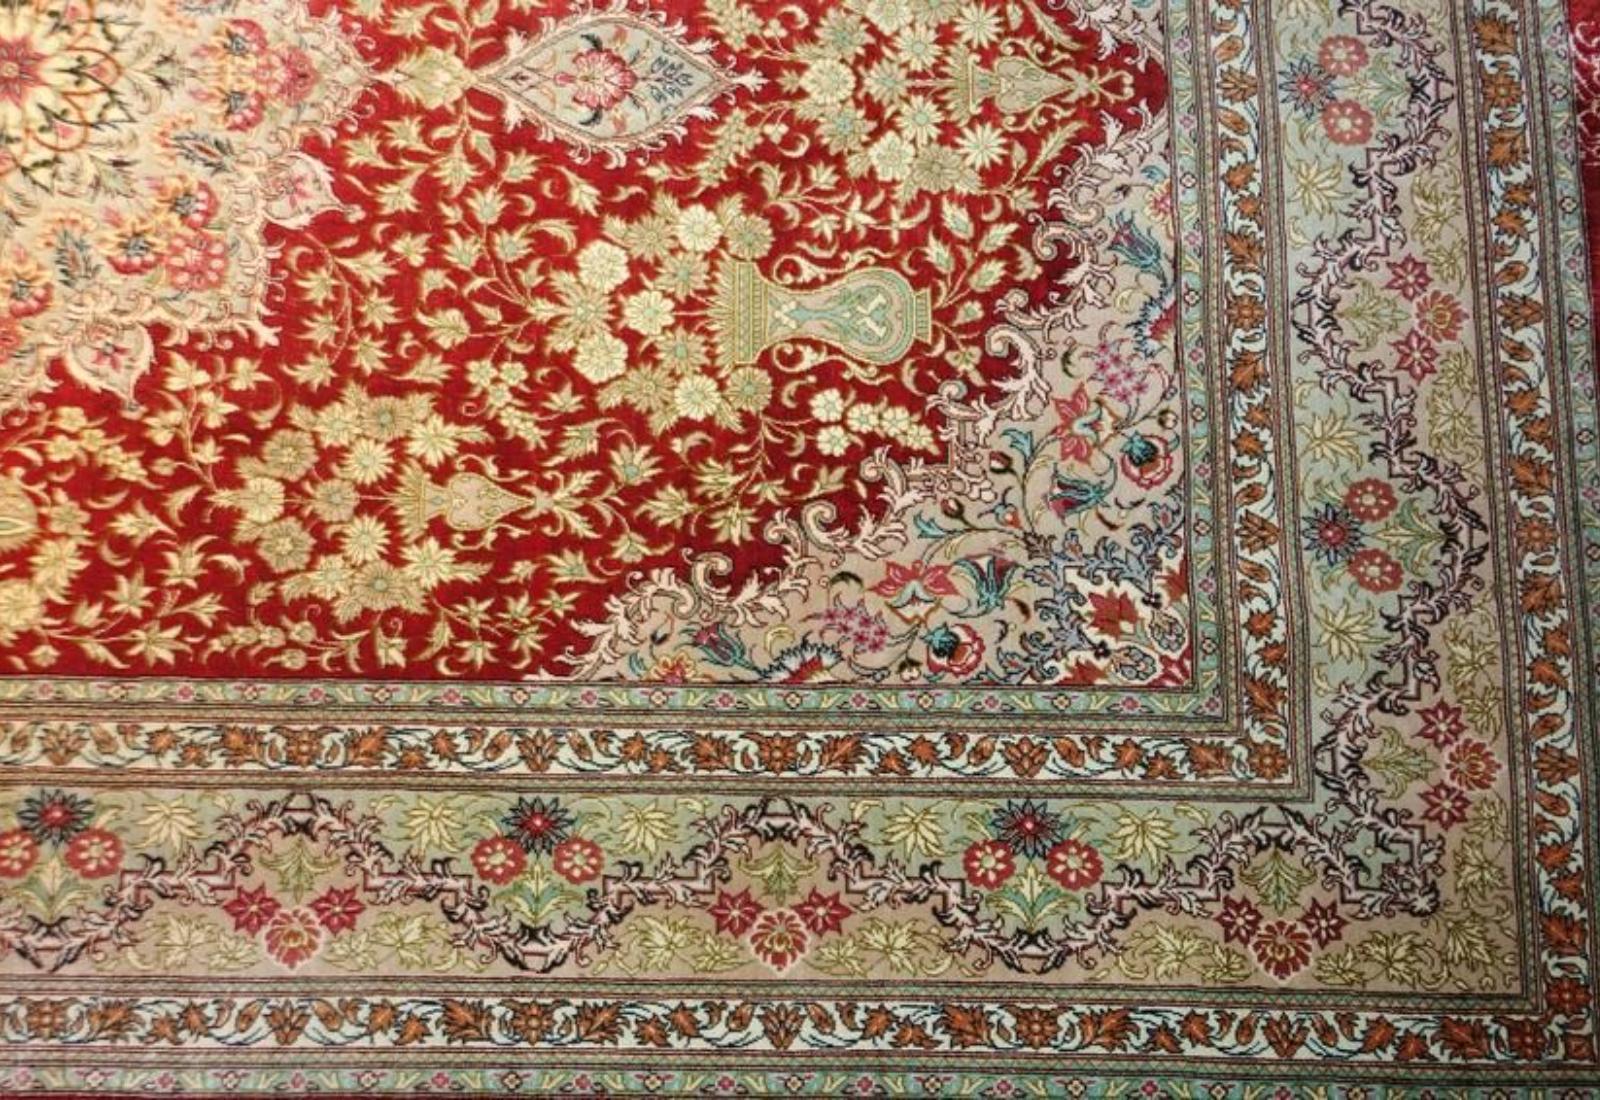 Very fine Persian Silk Qum - 6.8' 4.5' In Good Condition For Sale In Newmanstown, PA